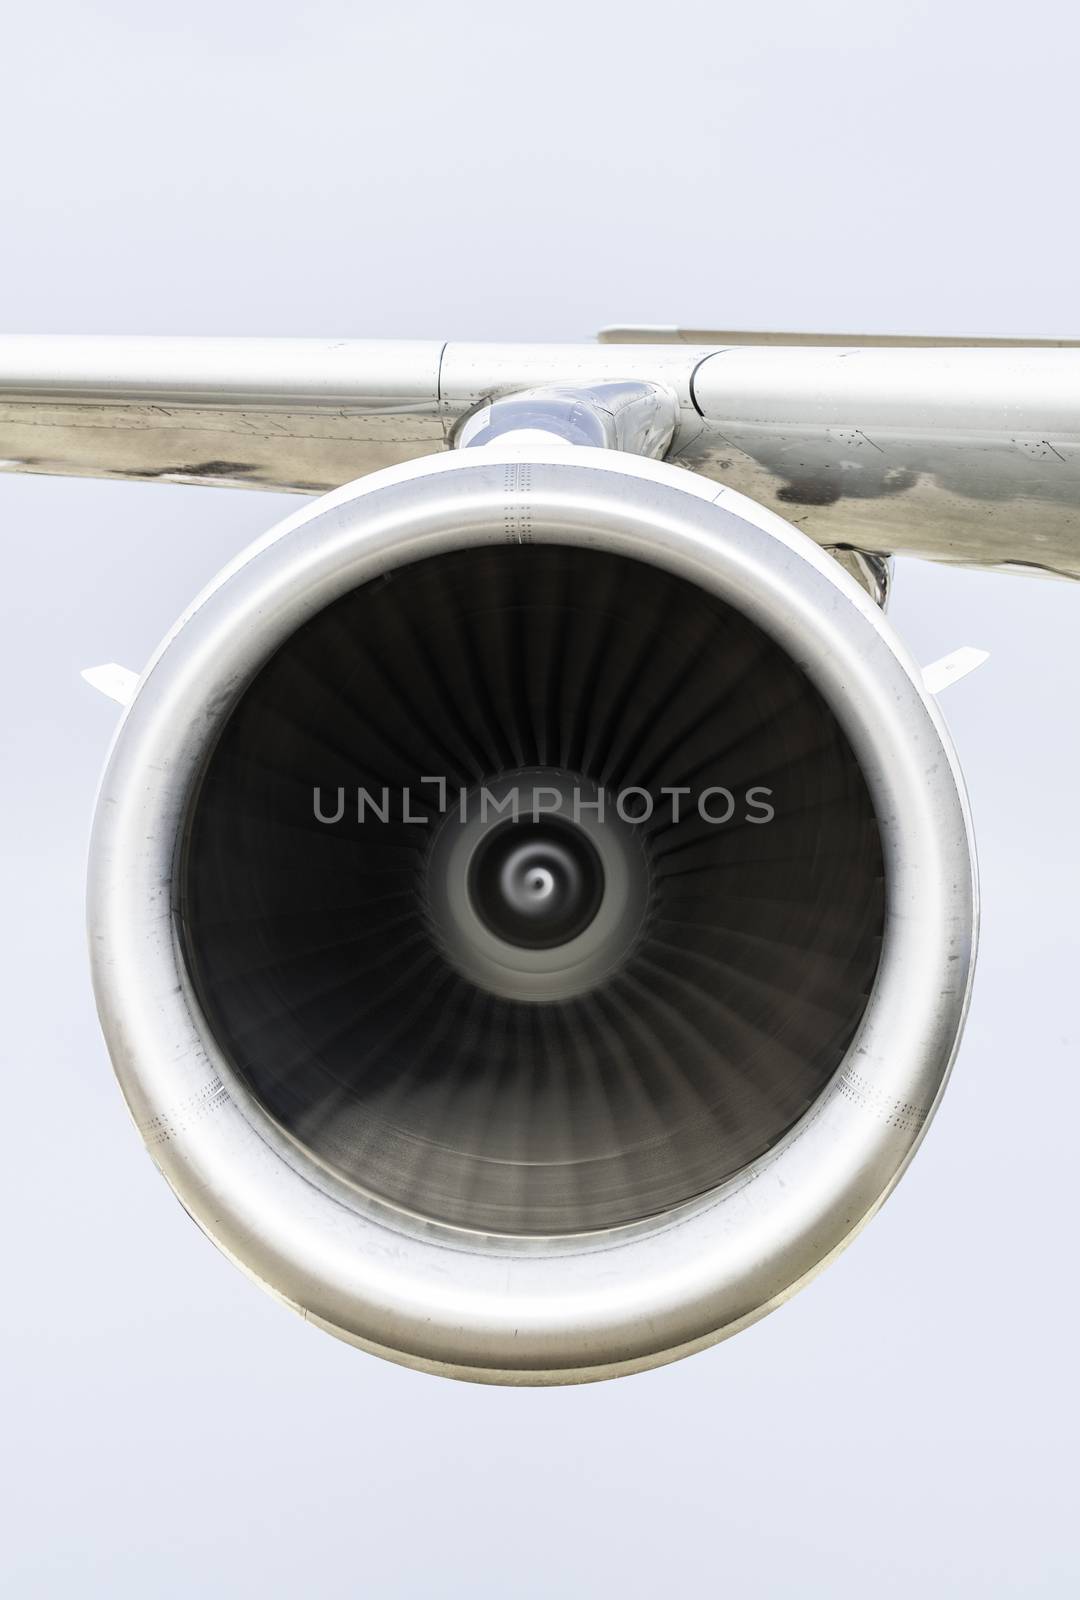 Jet engine on the airplane wing. Close-up frontal view of the jet engine and sky on the background. Air transport conception.